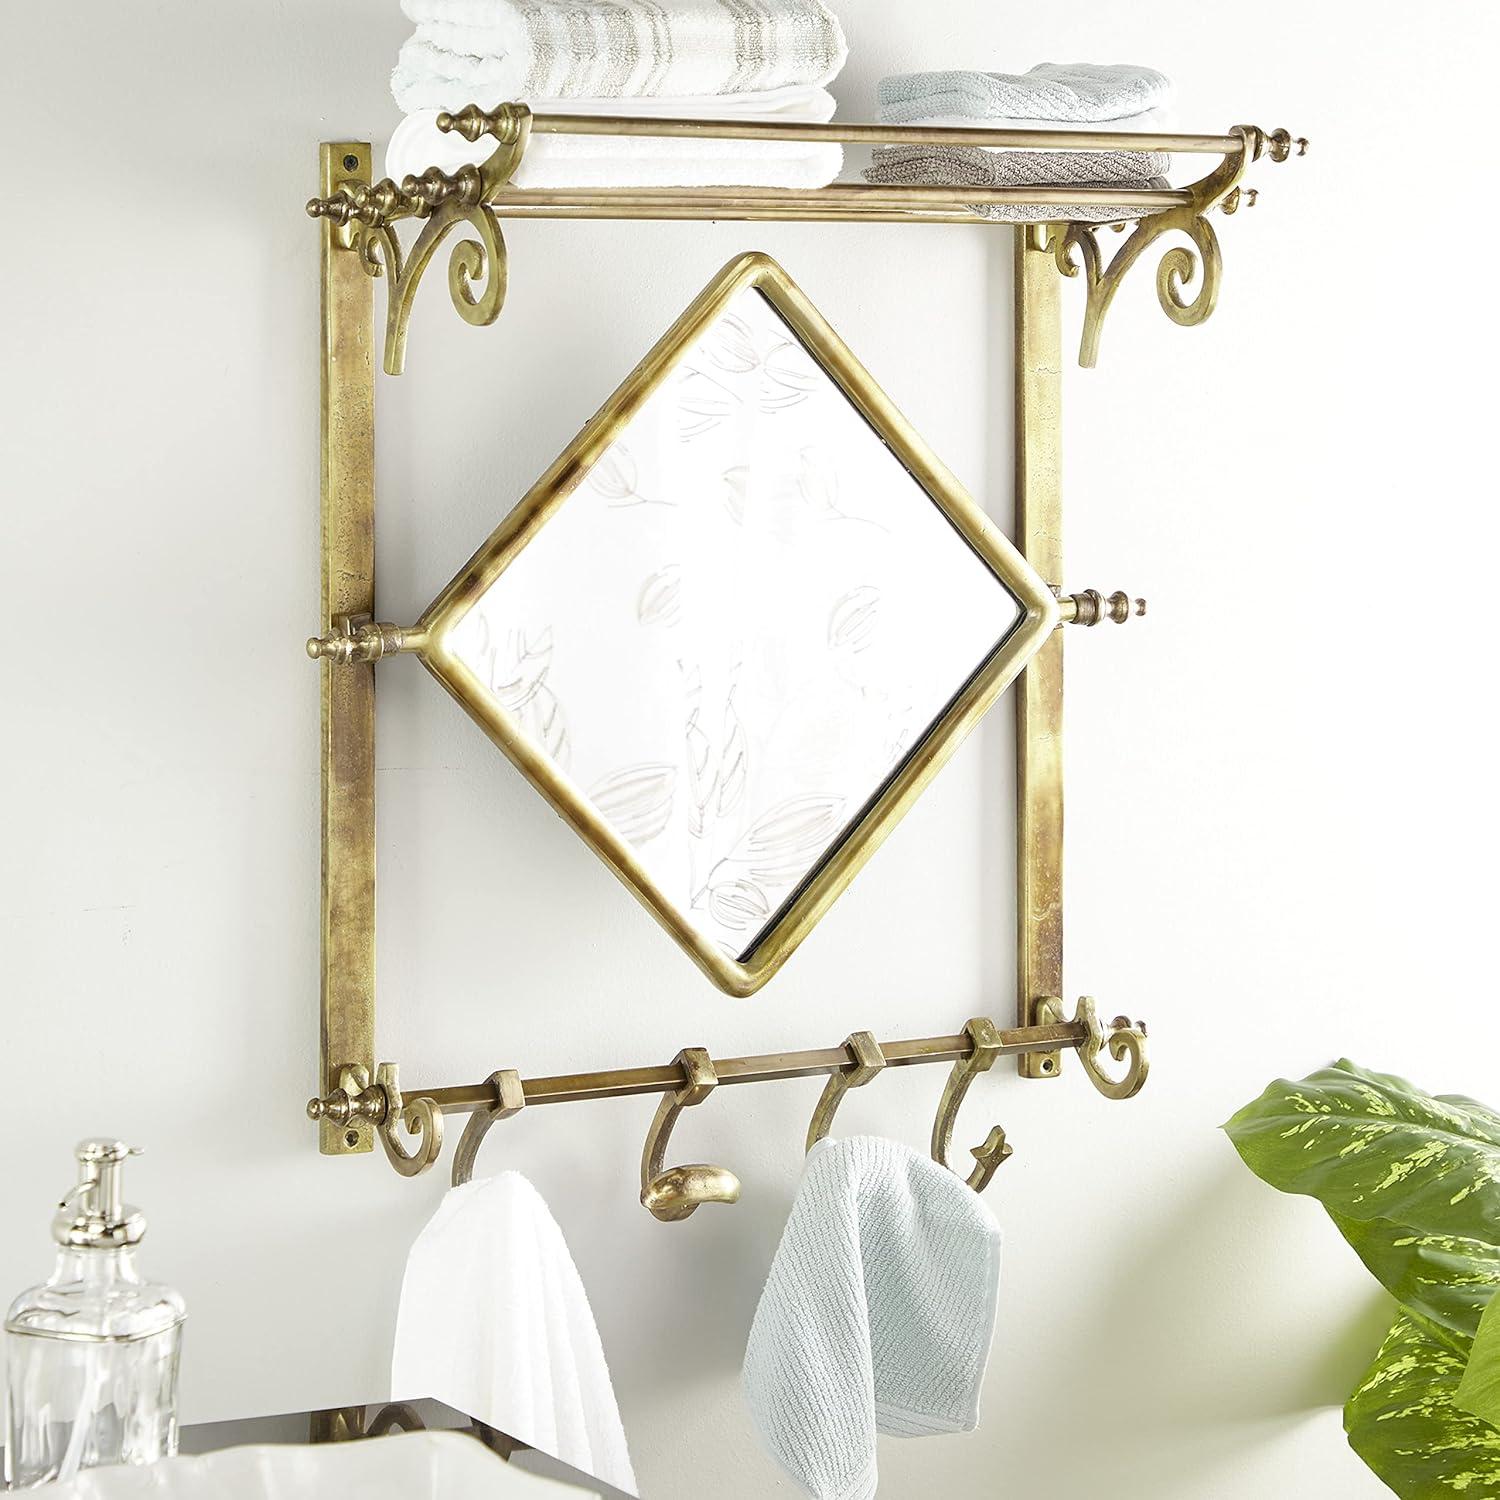 Vintage Brass and Brown Wood 25" Wall Rack with Diamond Mirror and Hooks